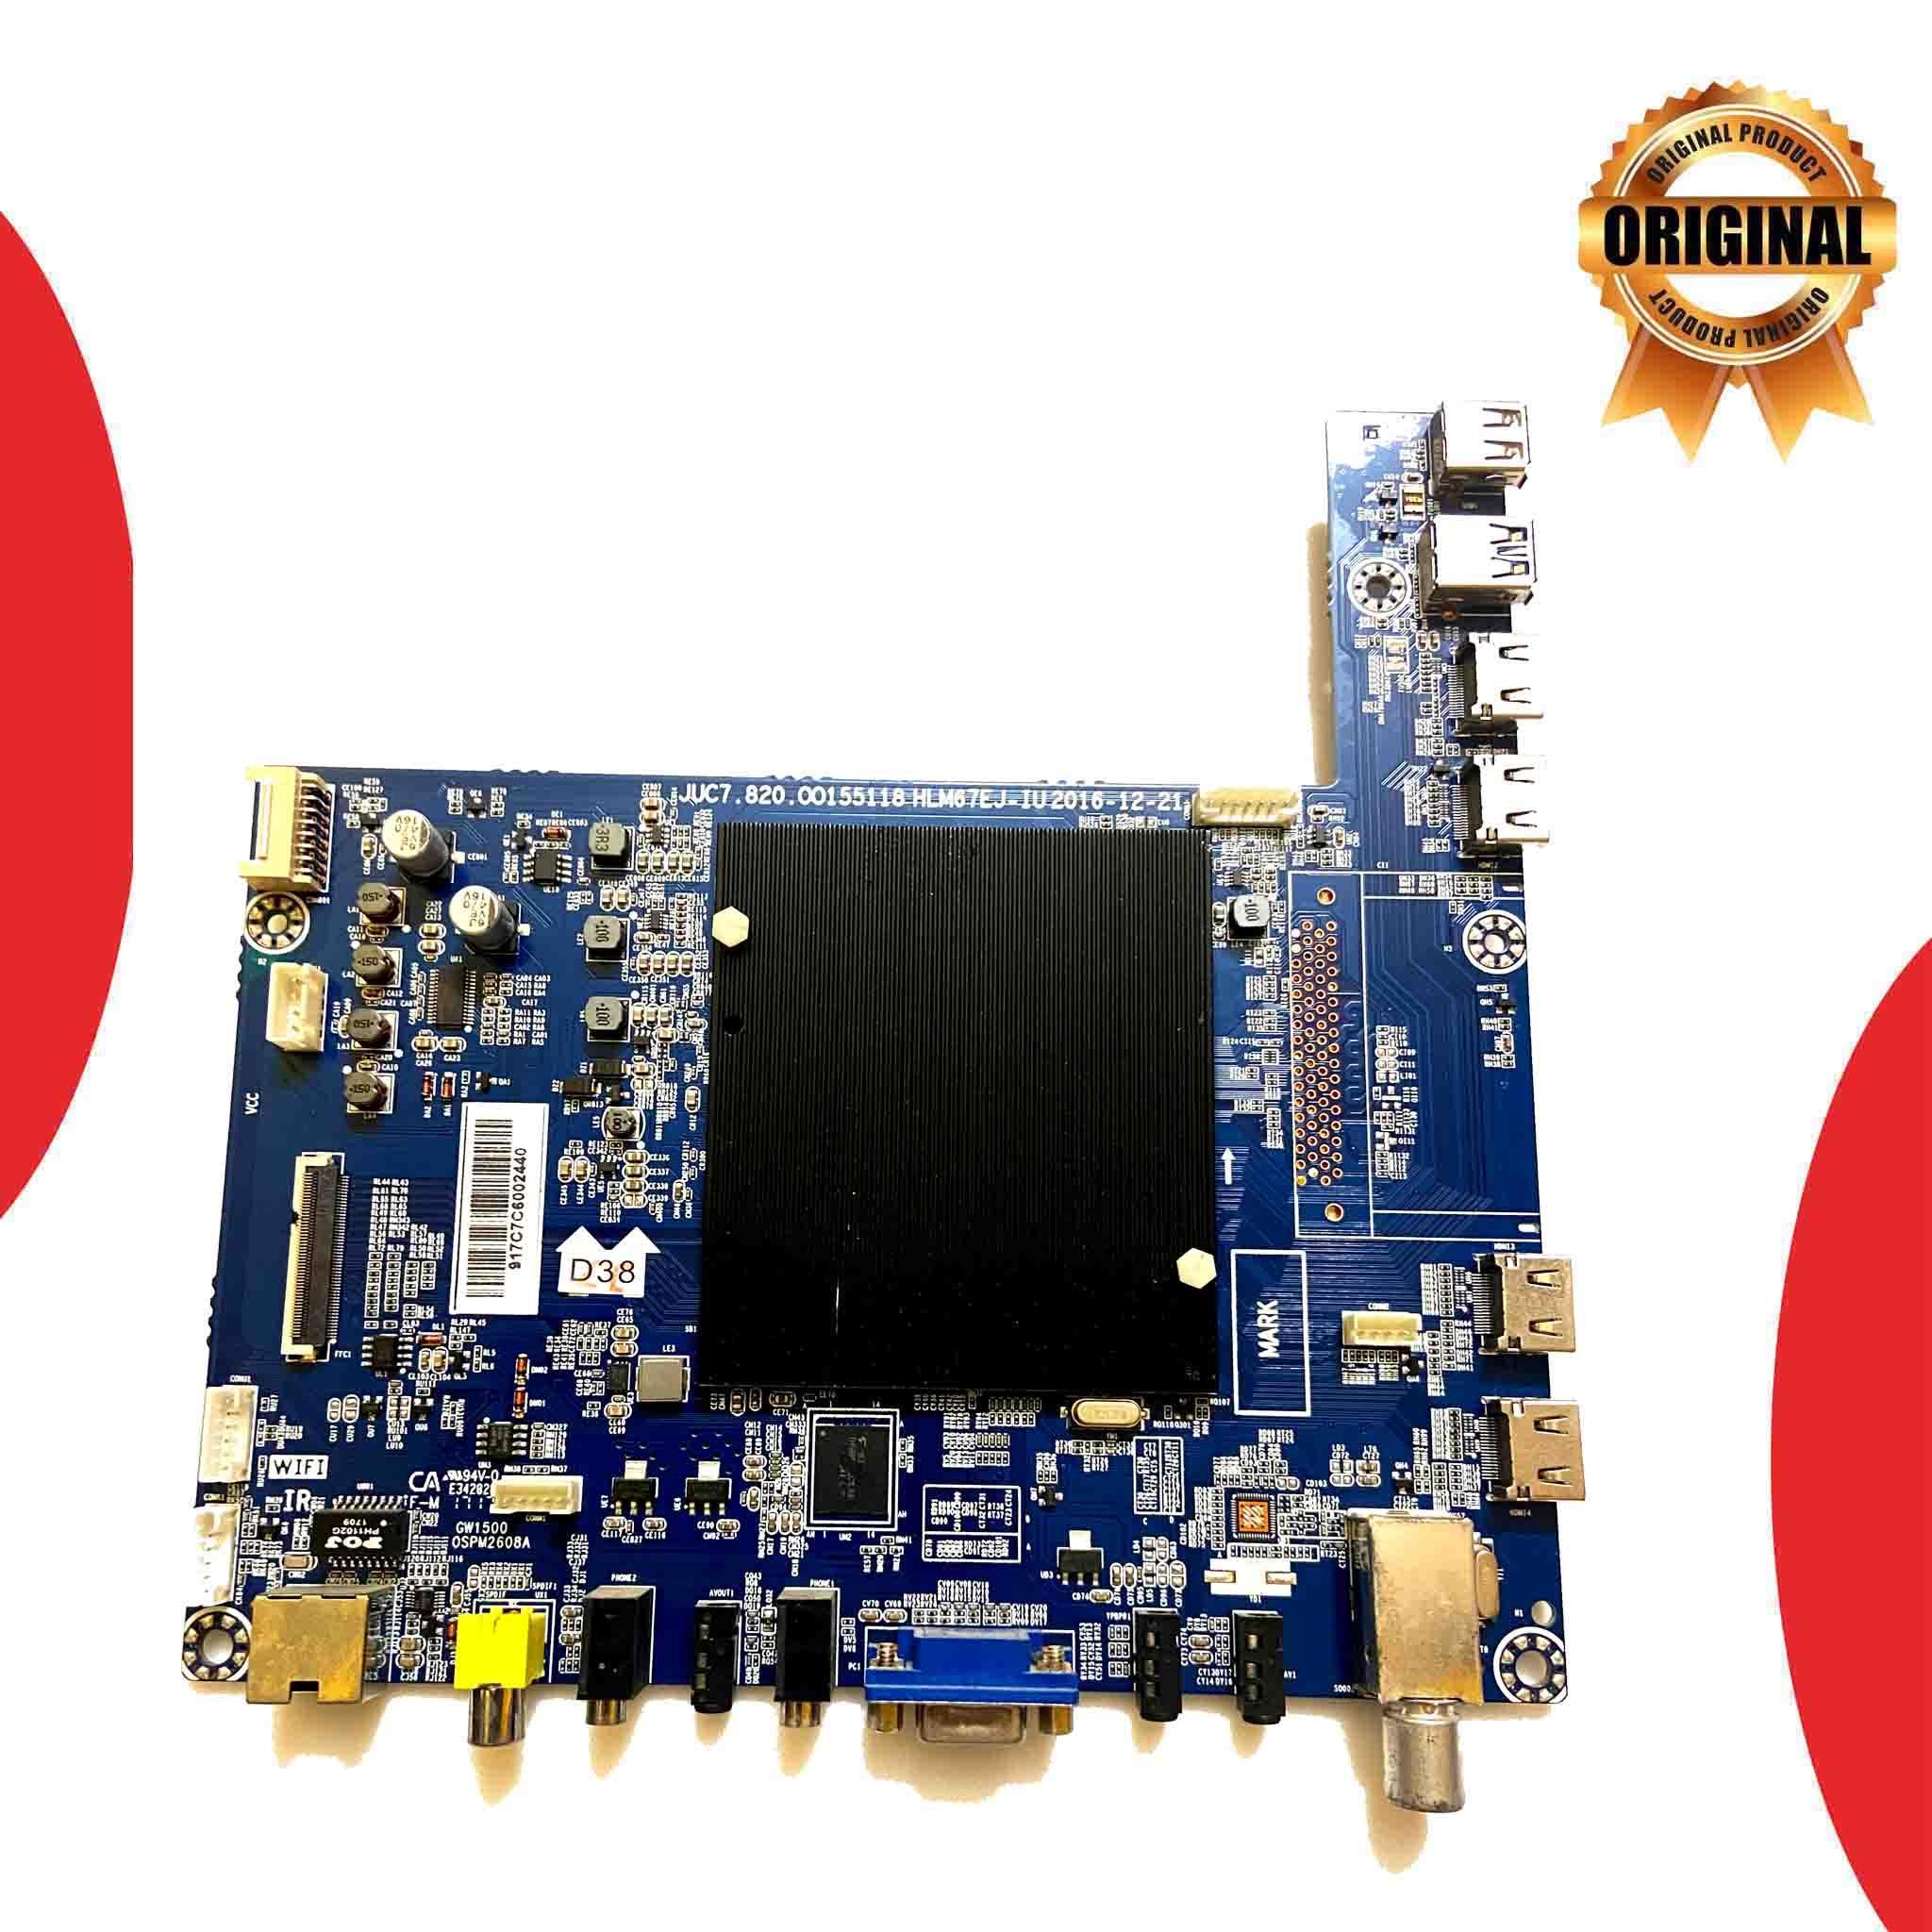 Reconnect 32 inch LED TV Motherboard for Model RELEE5502 - Great Bharat Electronics